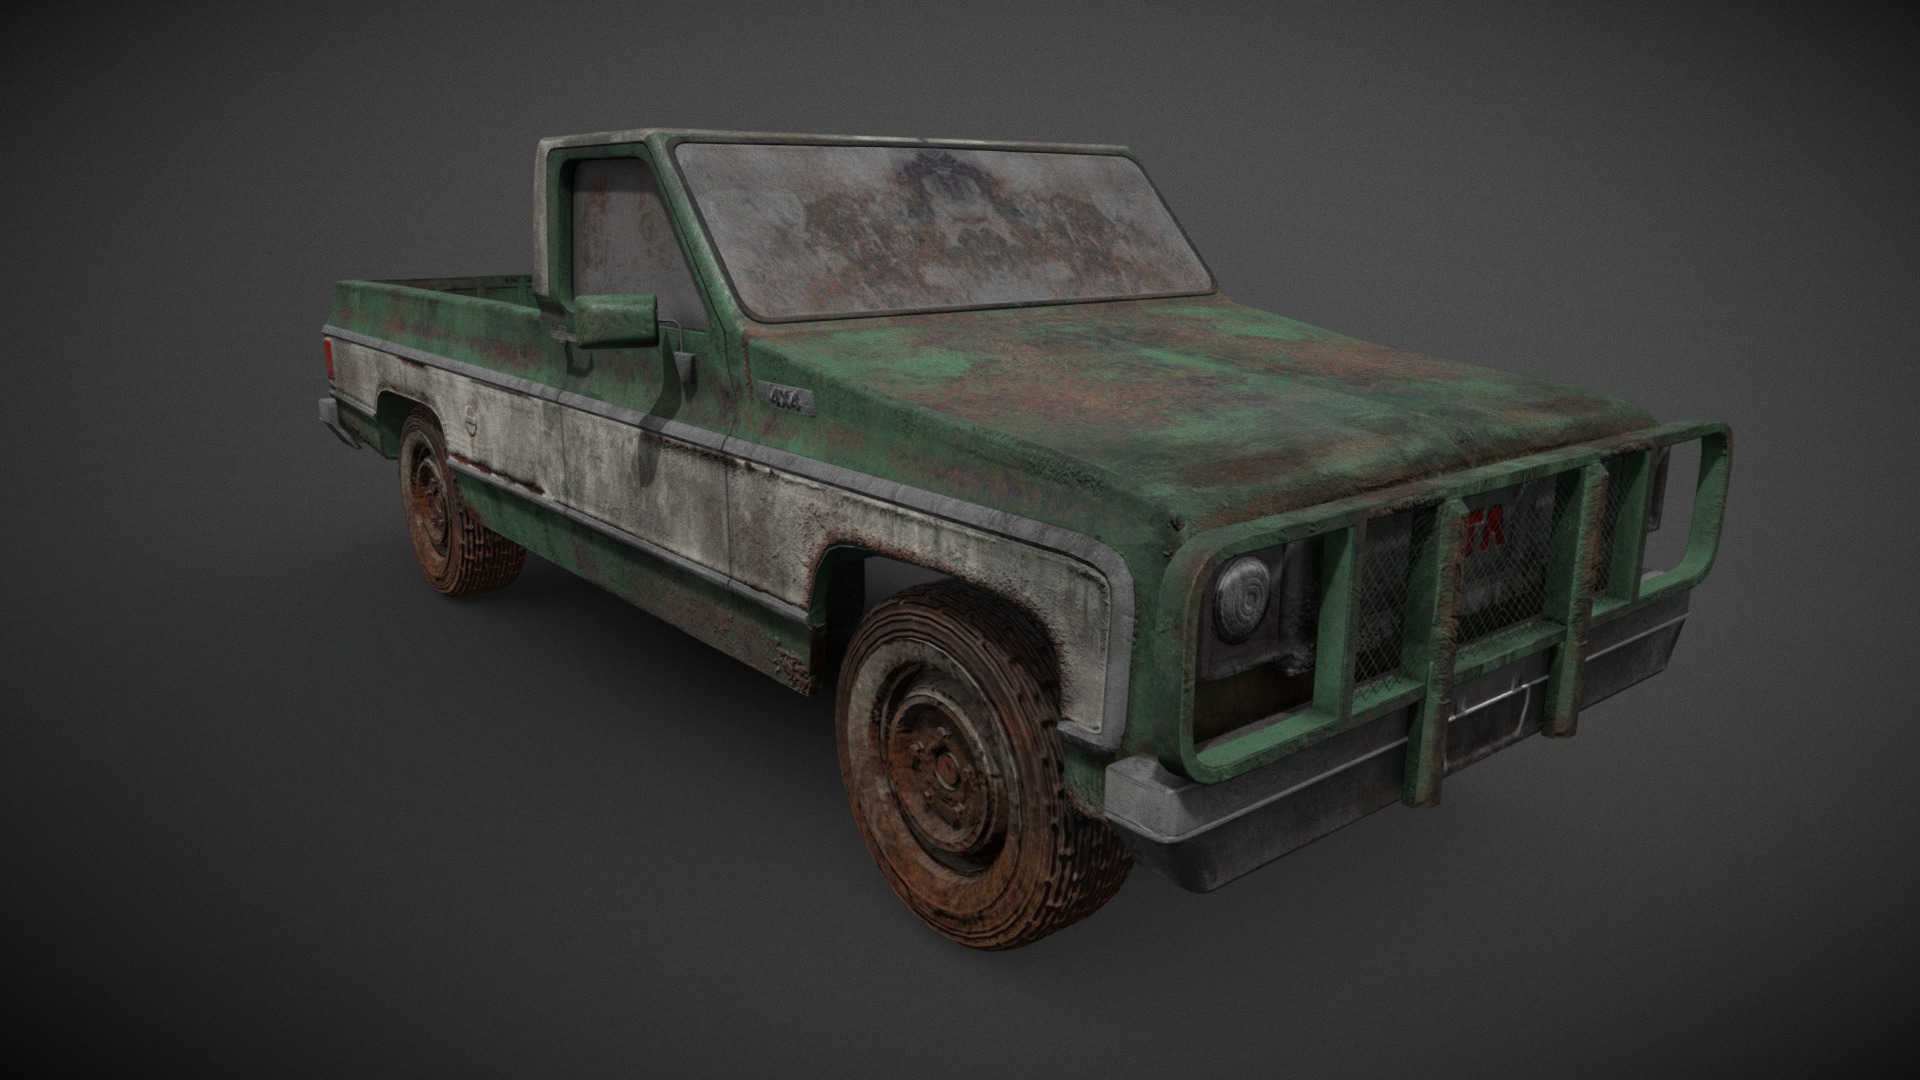 3D model Old Farm Pickup Truck - This is a 3D model of the Old Farm Pickup Truck. The 3D model is about a green car with a camouflage design.